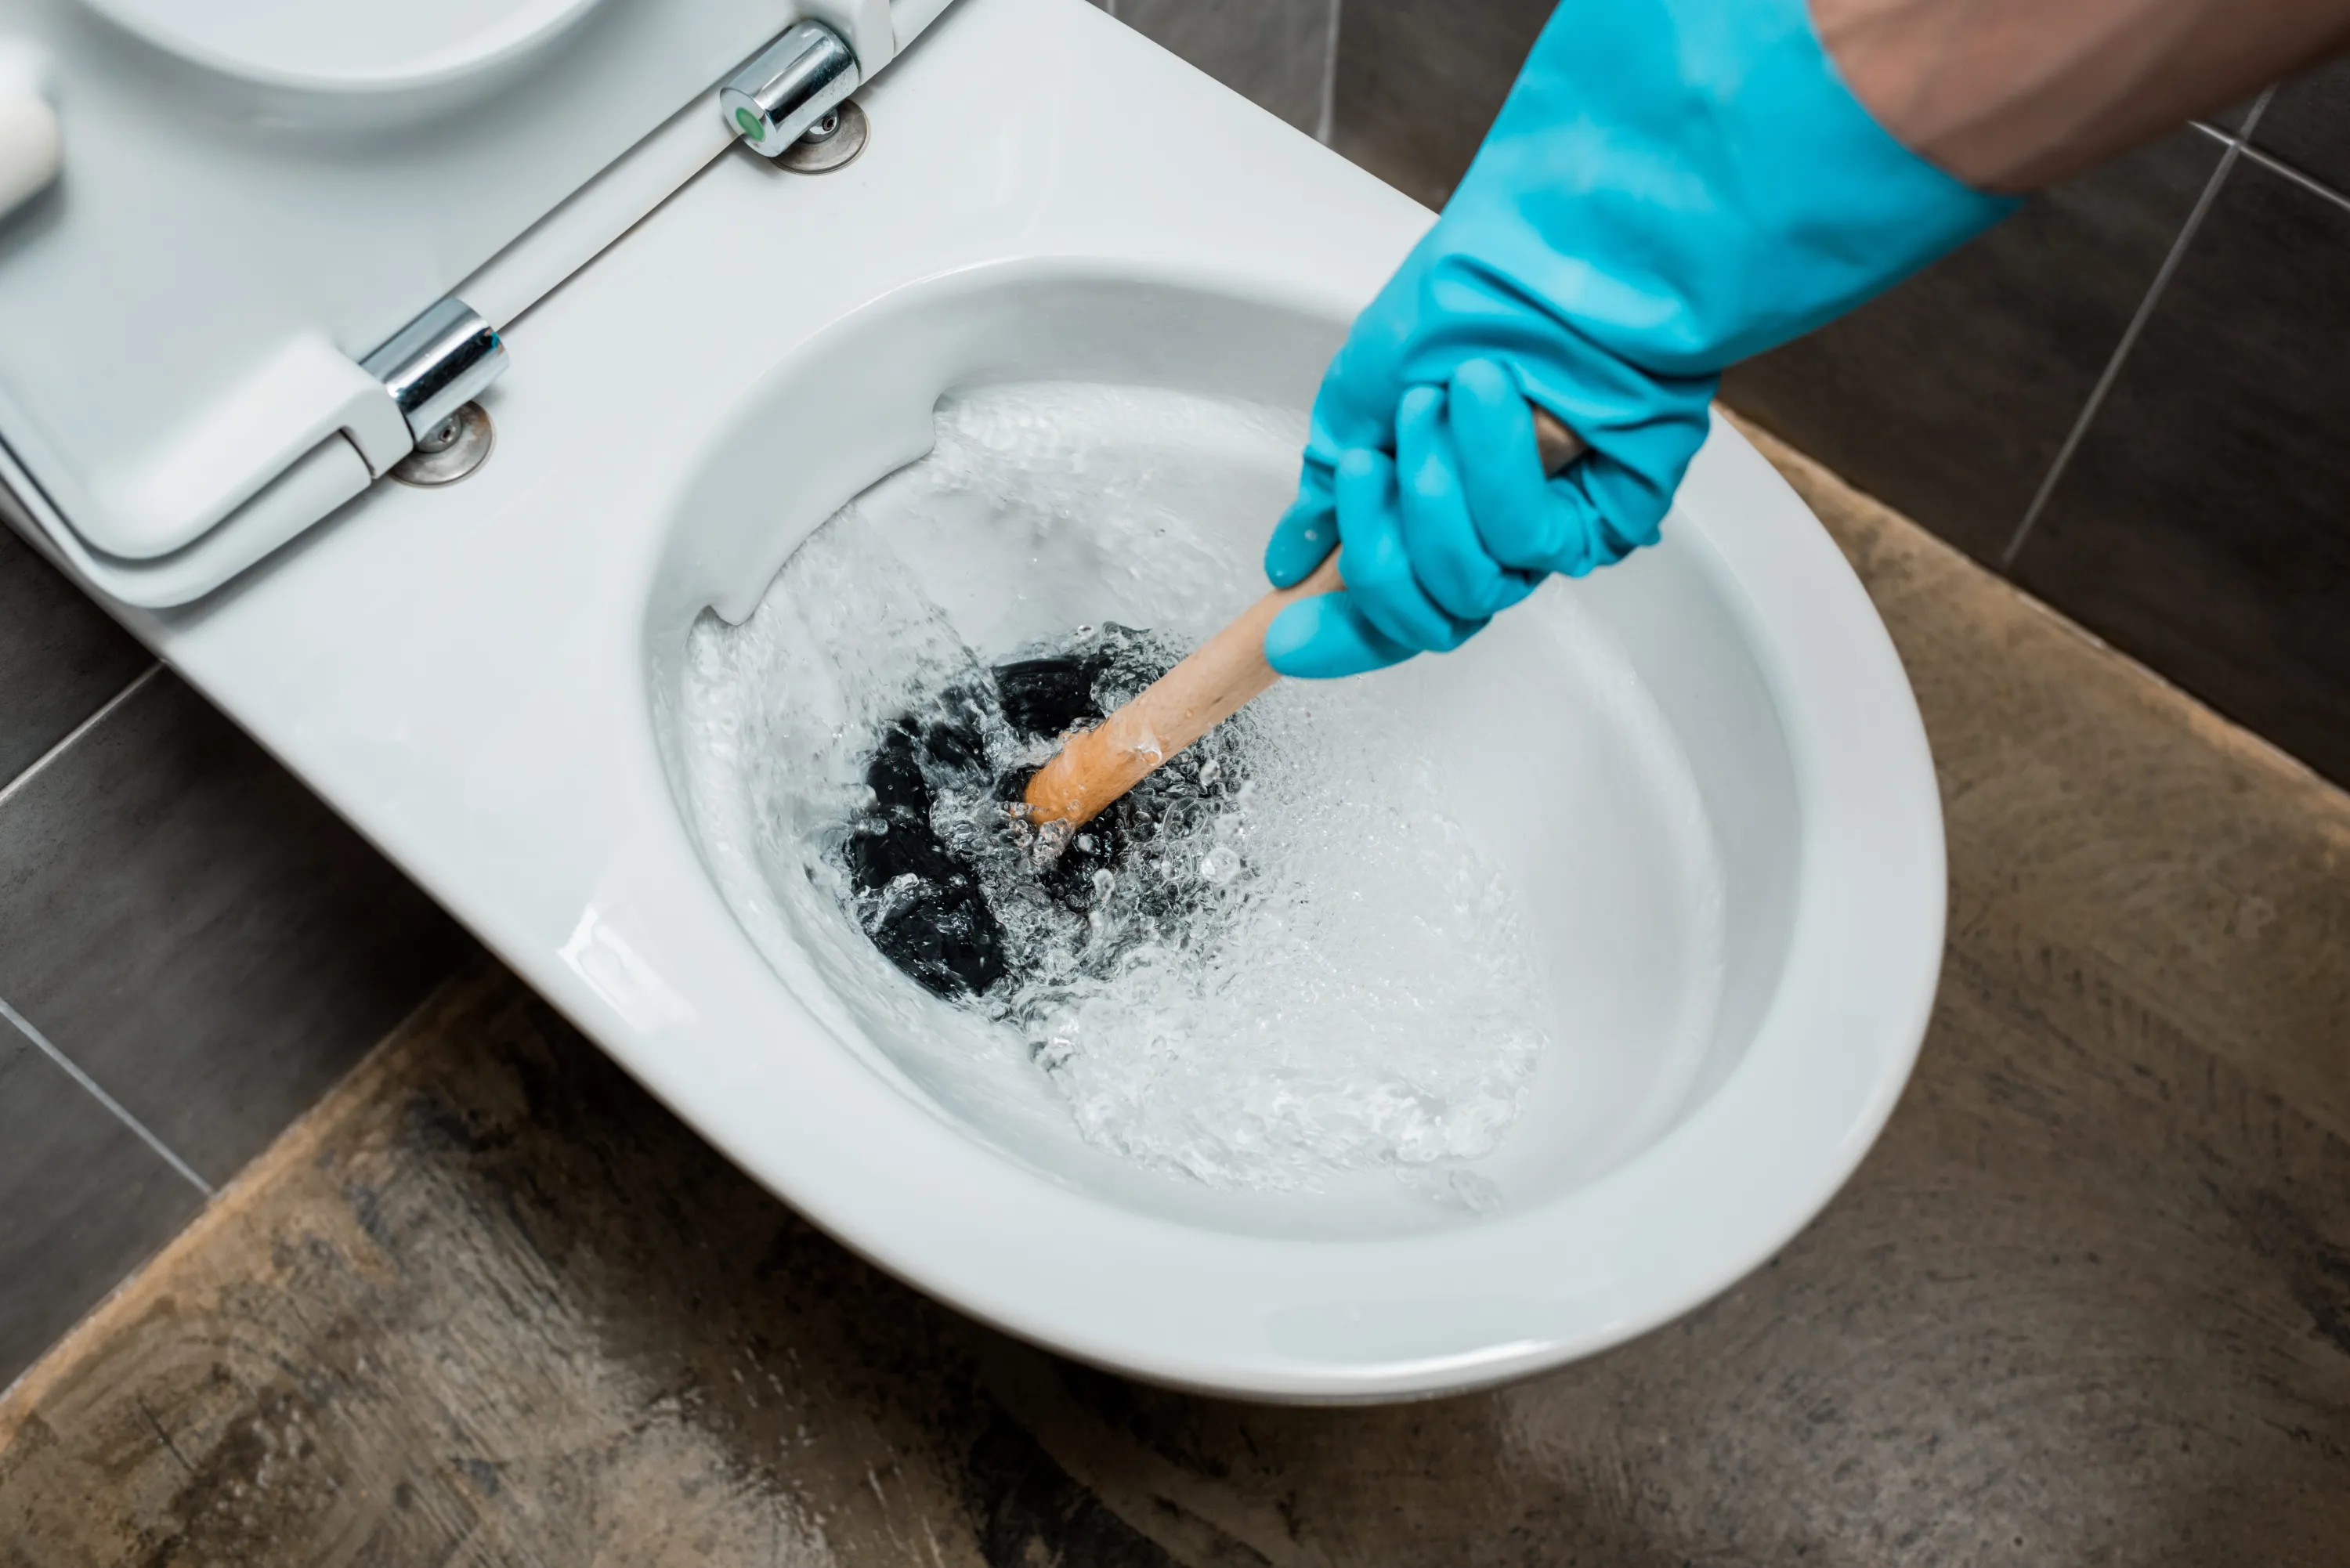 How To Clear A Clogged Toilet With A Plunger